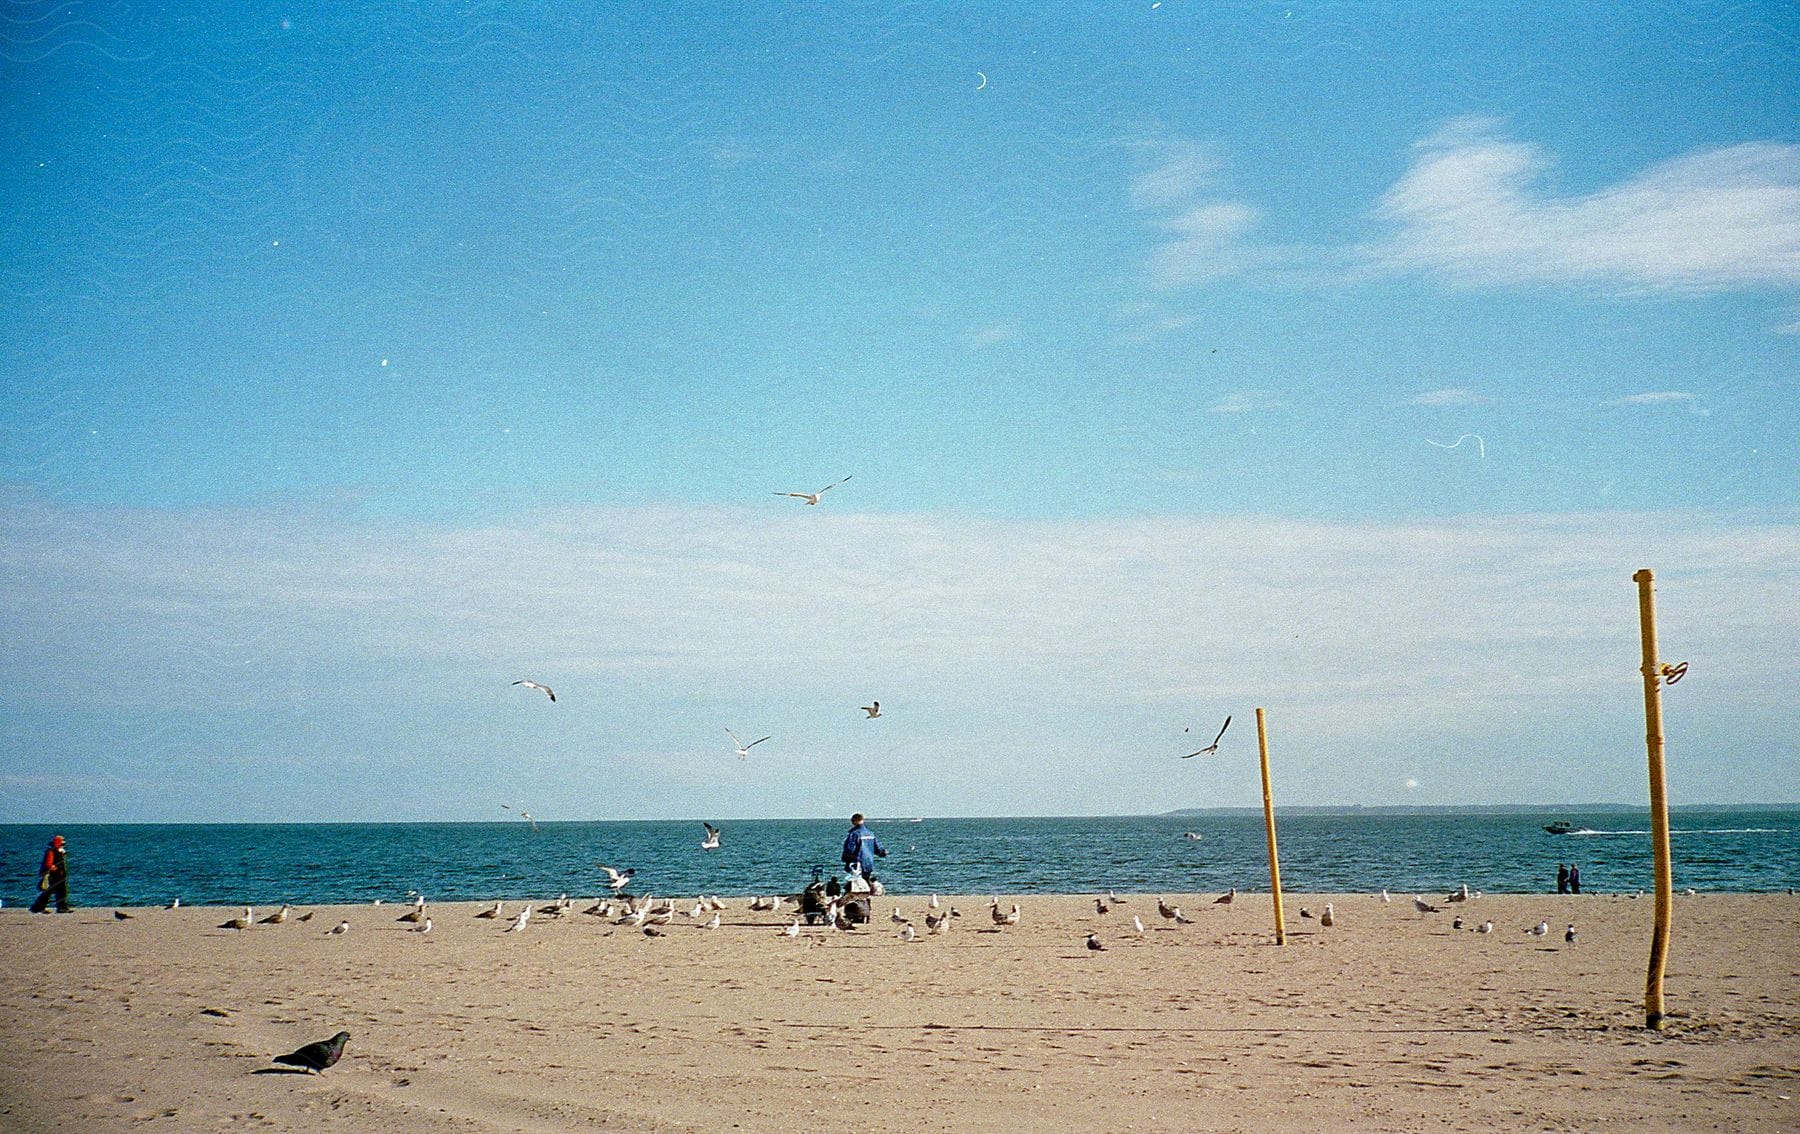 Two people on a beach with a sailboat in the background